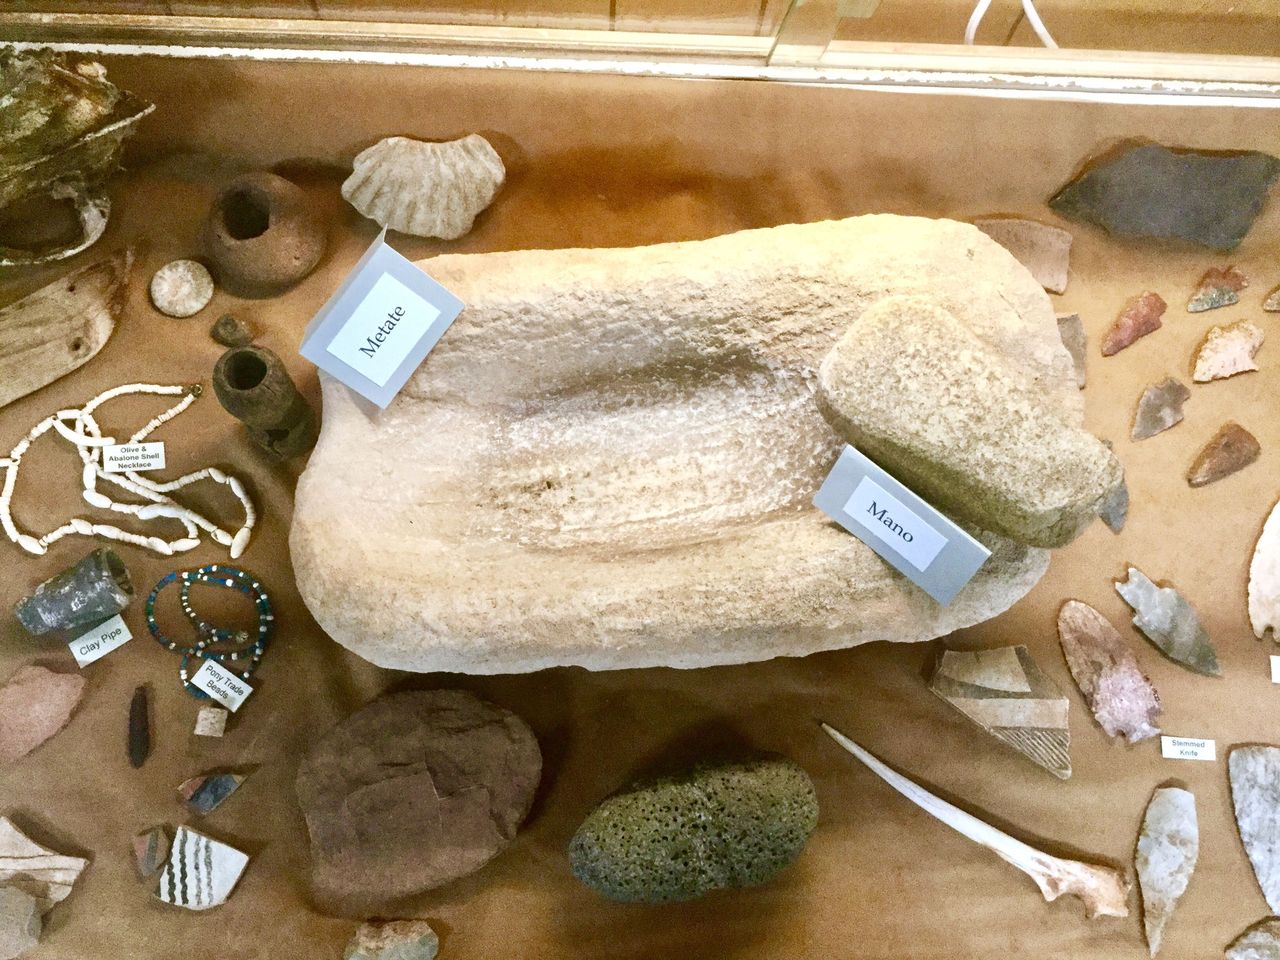 Stone mano & metate, used for grinding corn.